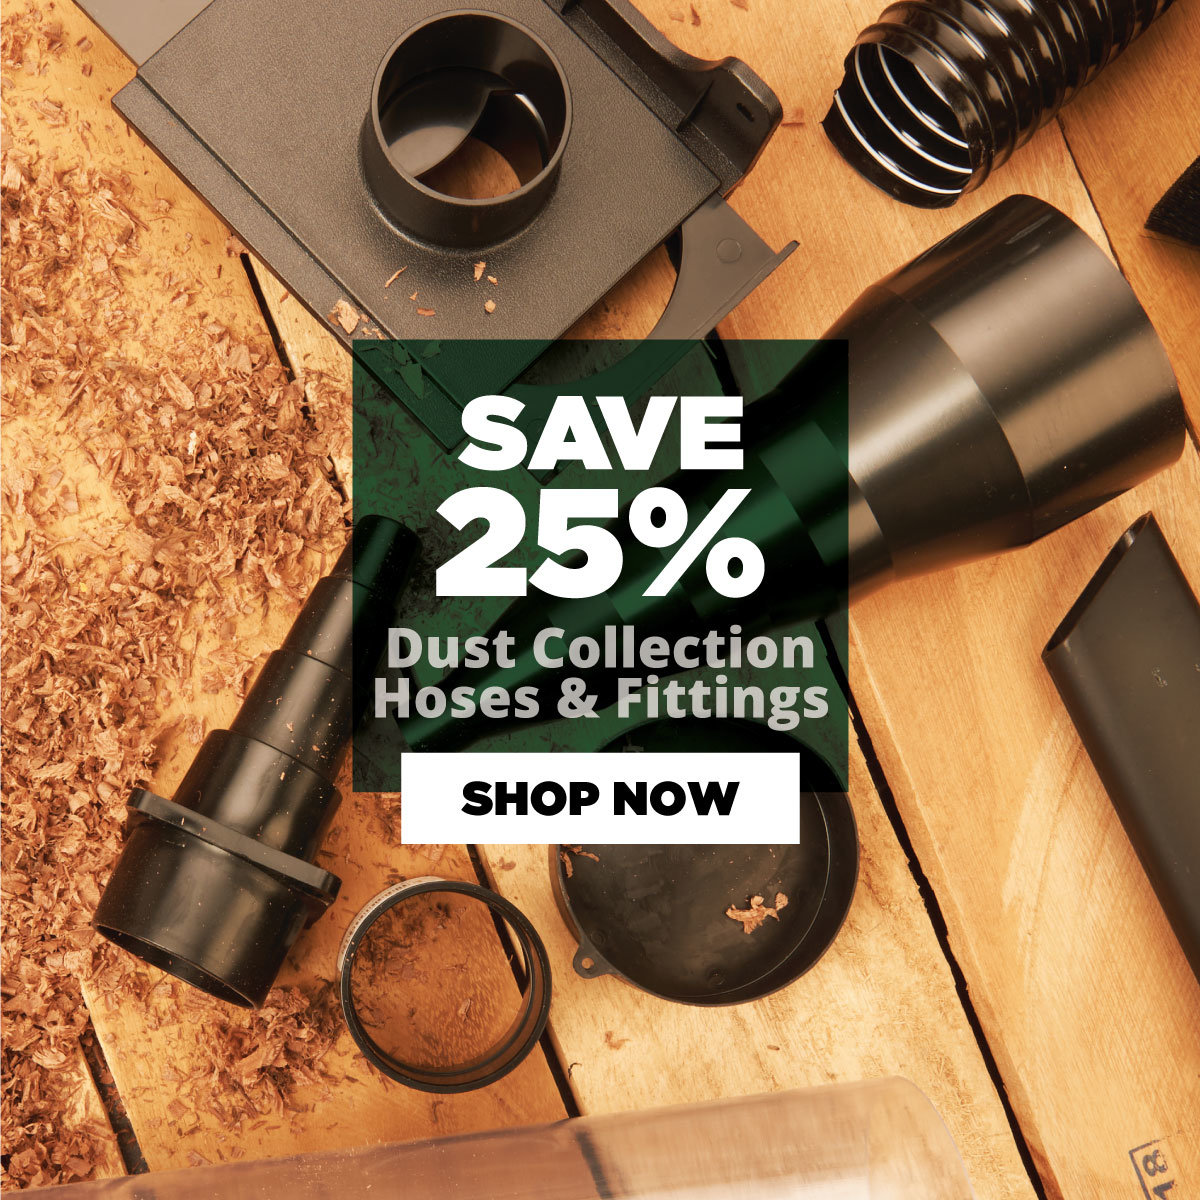 Save 25% Dust Collection Hoses & Fittings